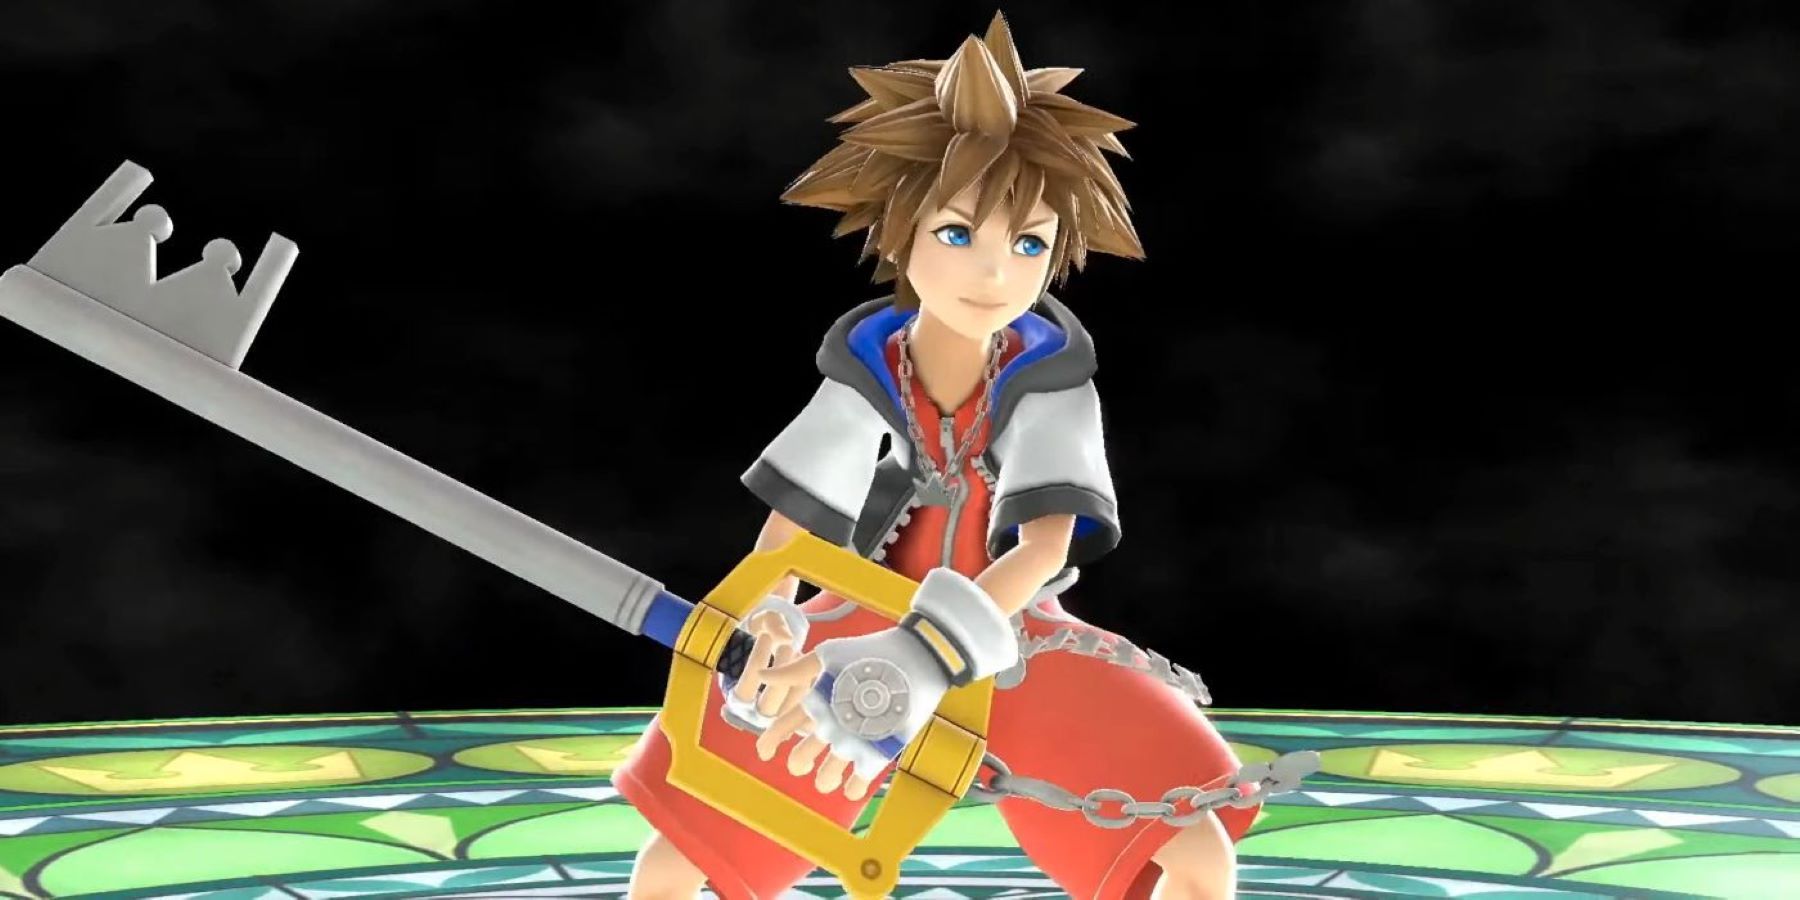 Sora holding his Keyblade and standing in the Hollow Bastion stage's Dive to the Heart form in Super Smash Bros. Ultimate